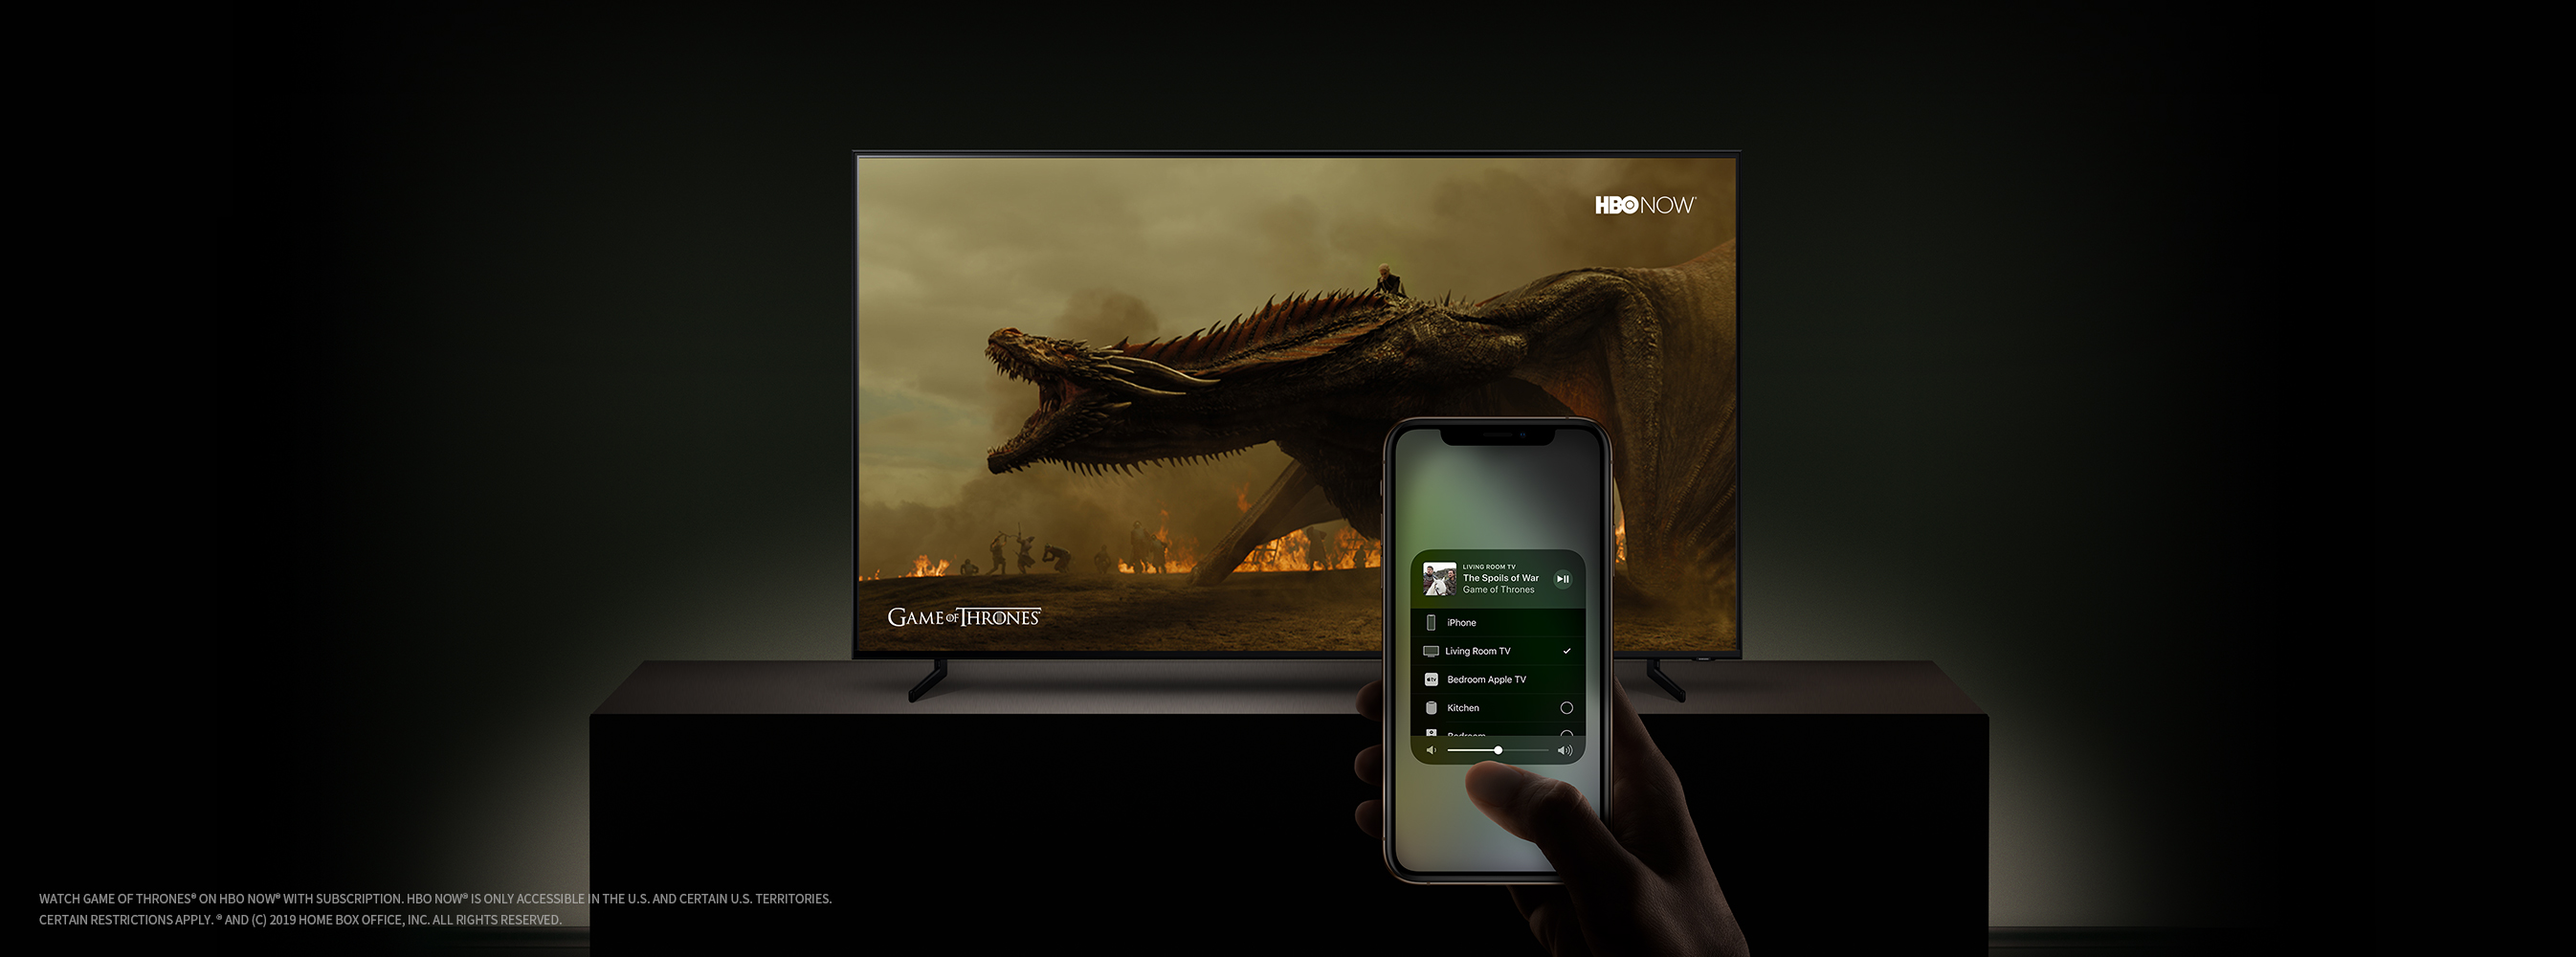 2019 & 2018 Samsung Smart TVs to Support iTunes Movies & TV Shows and AirPlay 2 in Spring 2019